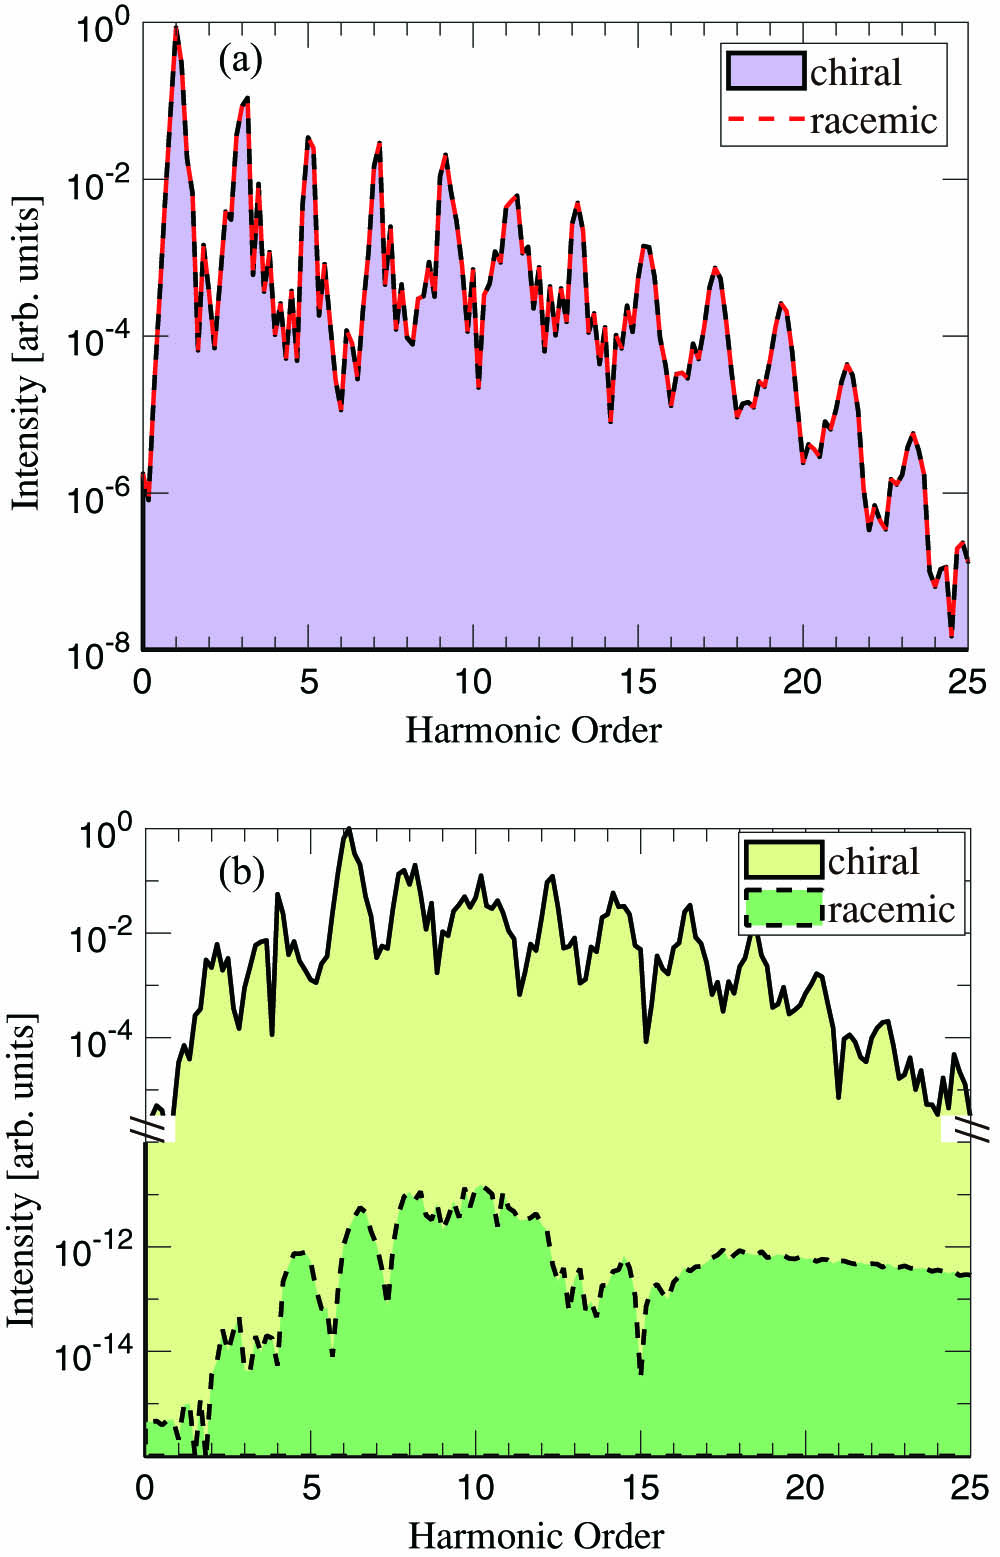 Numerically calculated normalized intensity of (a) x-polarized and (b) y-polarized HHG emissions from the chiral and racemic ensembles based on TDDFT. For the chiral ensemble, only odd harmonics have x-polarized components, and only even harmonics have y-polarized components. But, for the racemic ensemble, there is no y-polarized harmonic emission, and the x-polarized harmonic orders are still odd. The detailed parameters are given in the Letter.